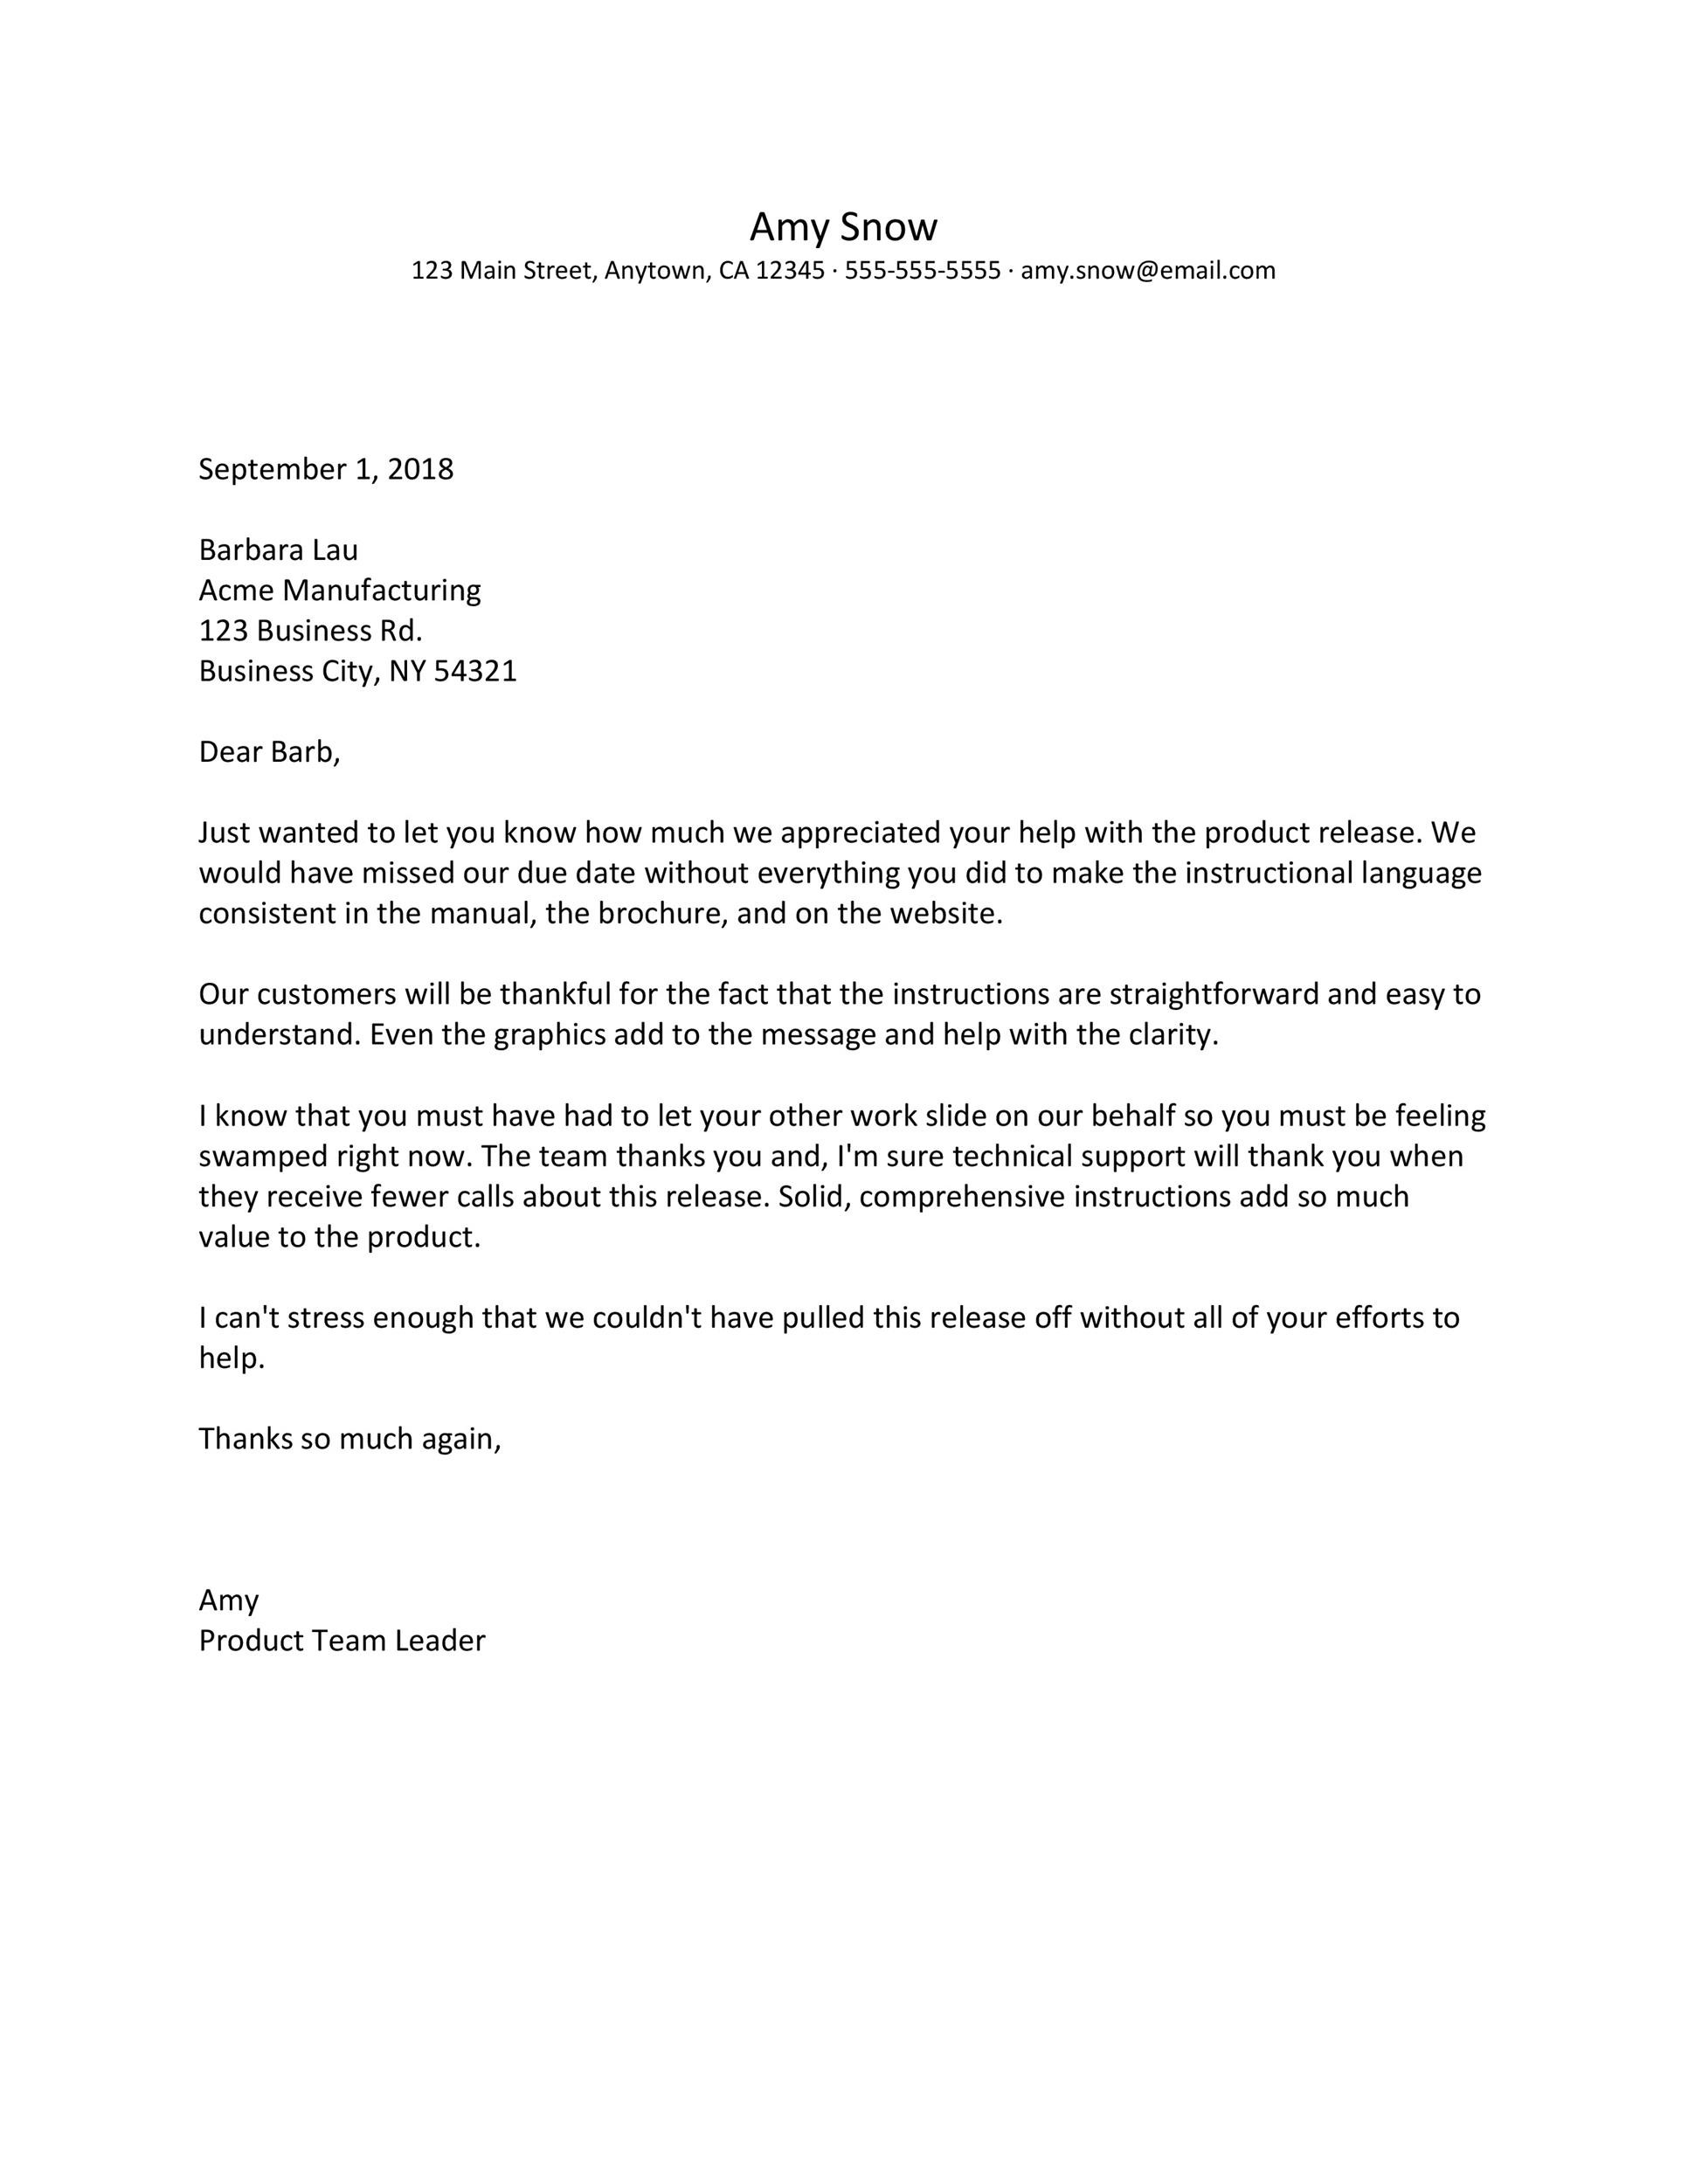 Free recognition letter 03